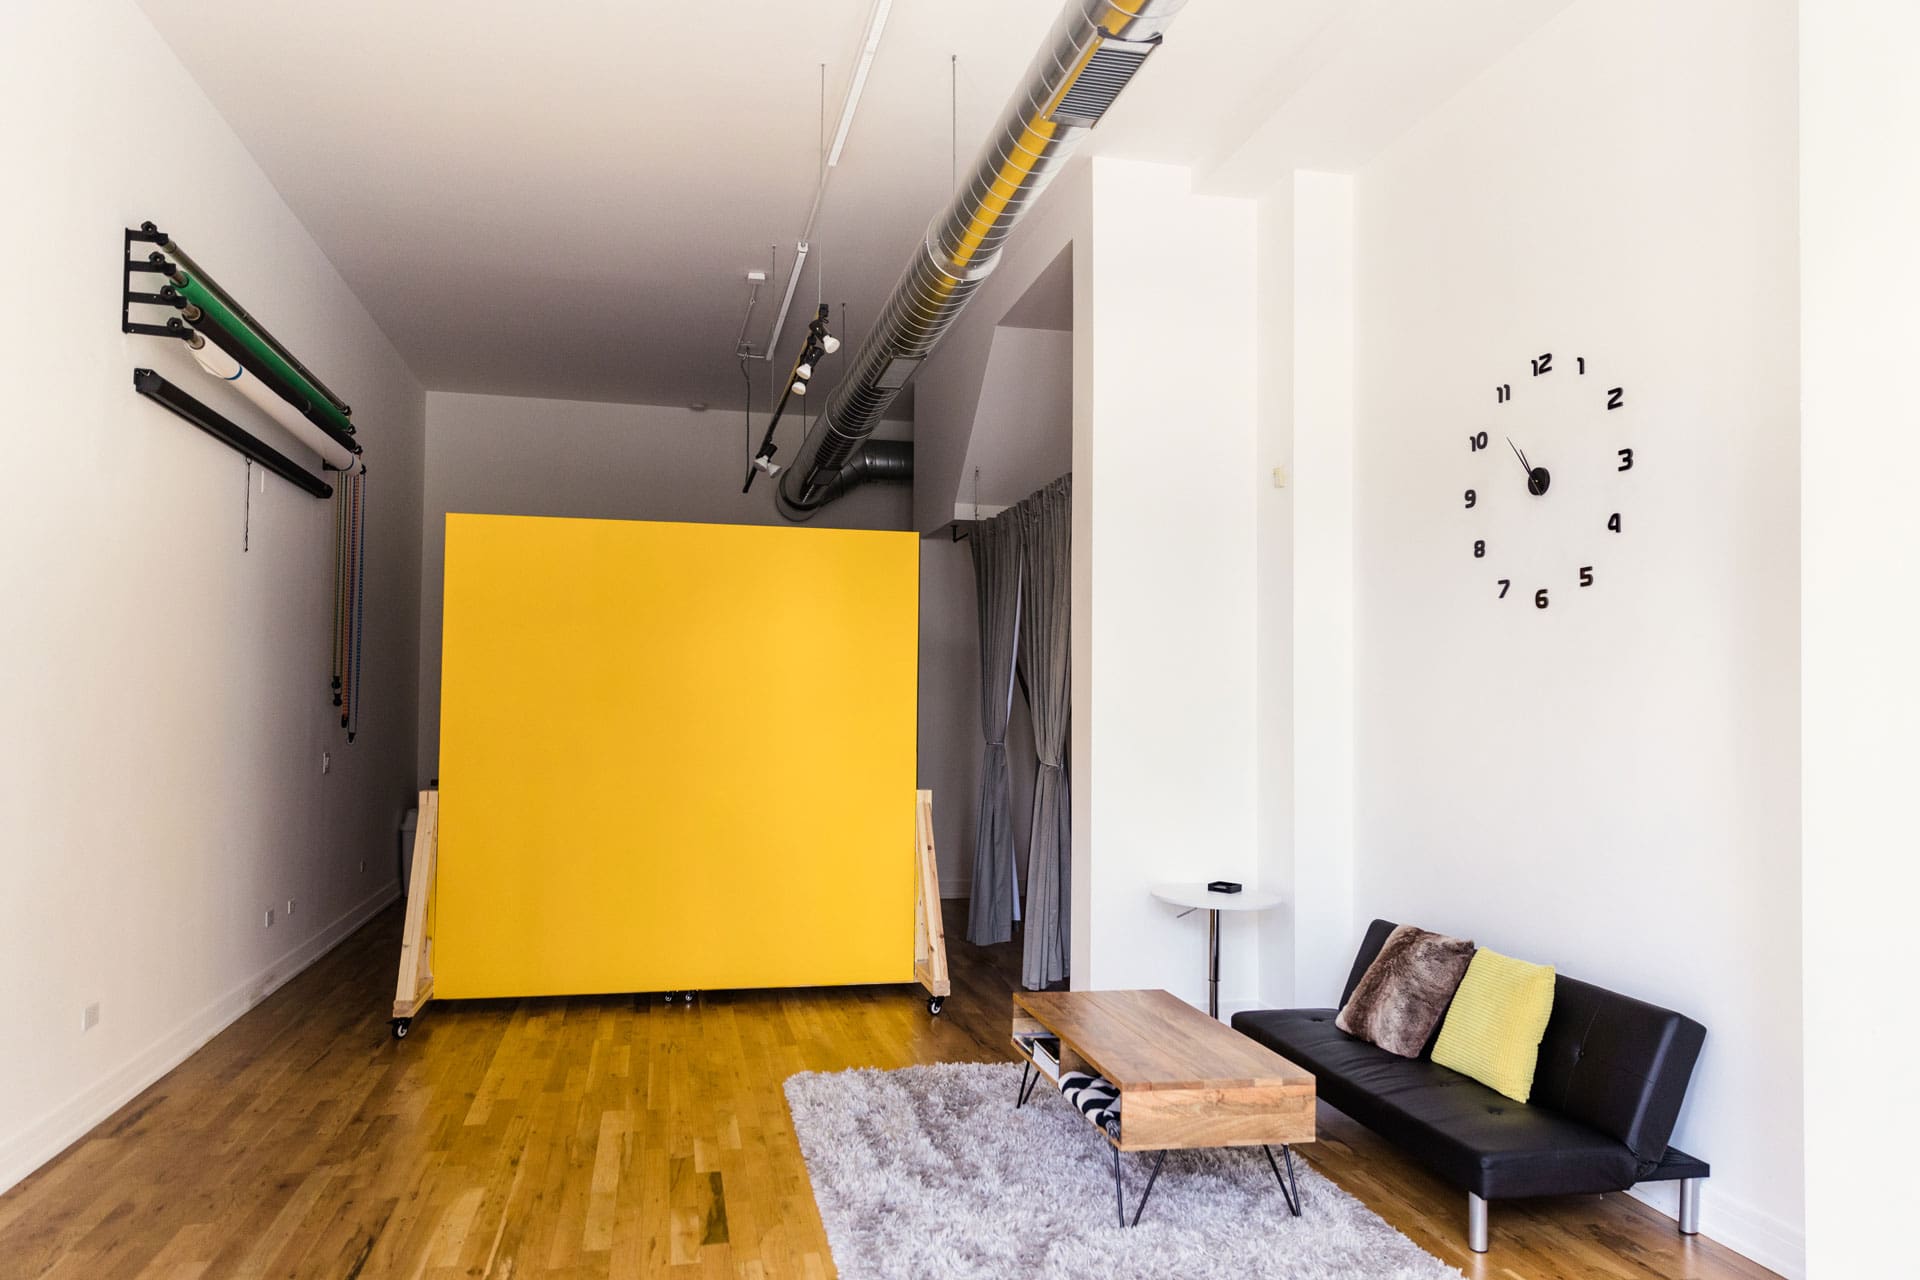 Interior of natural light photography studio P&M Studio Chicago including lounge area and yellow mobile wall